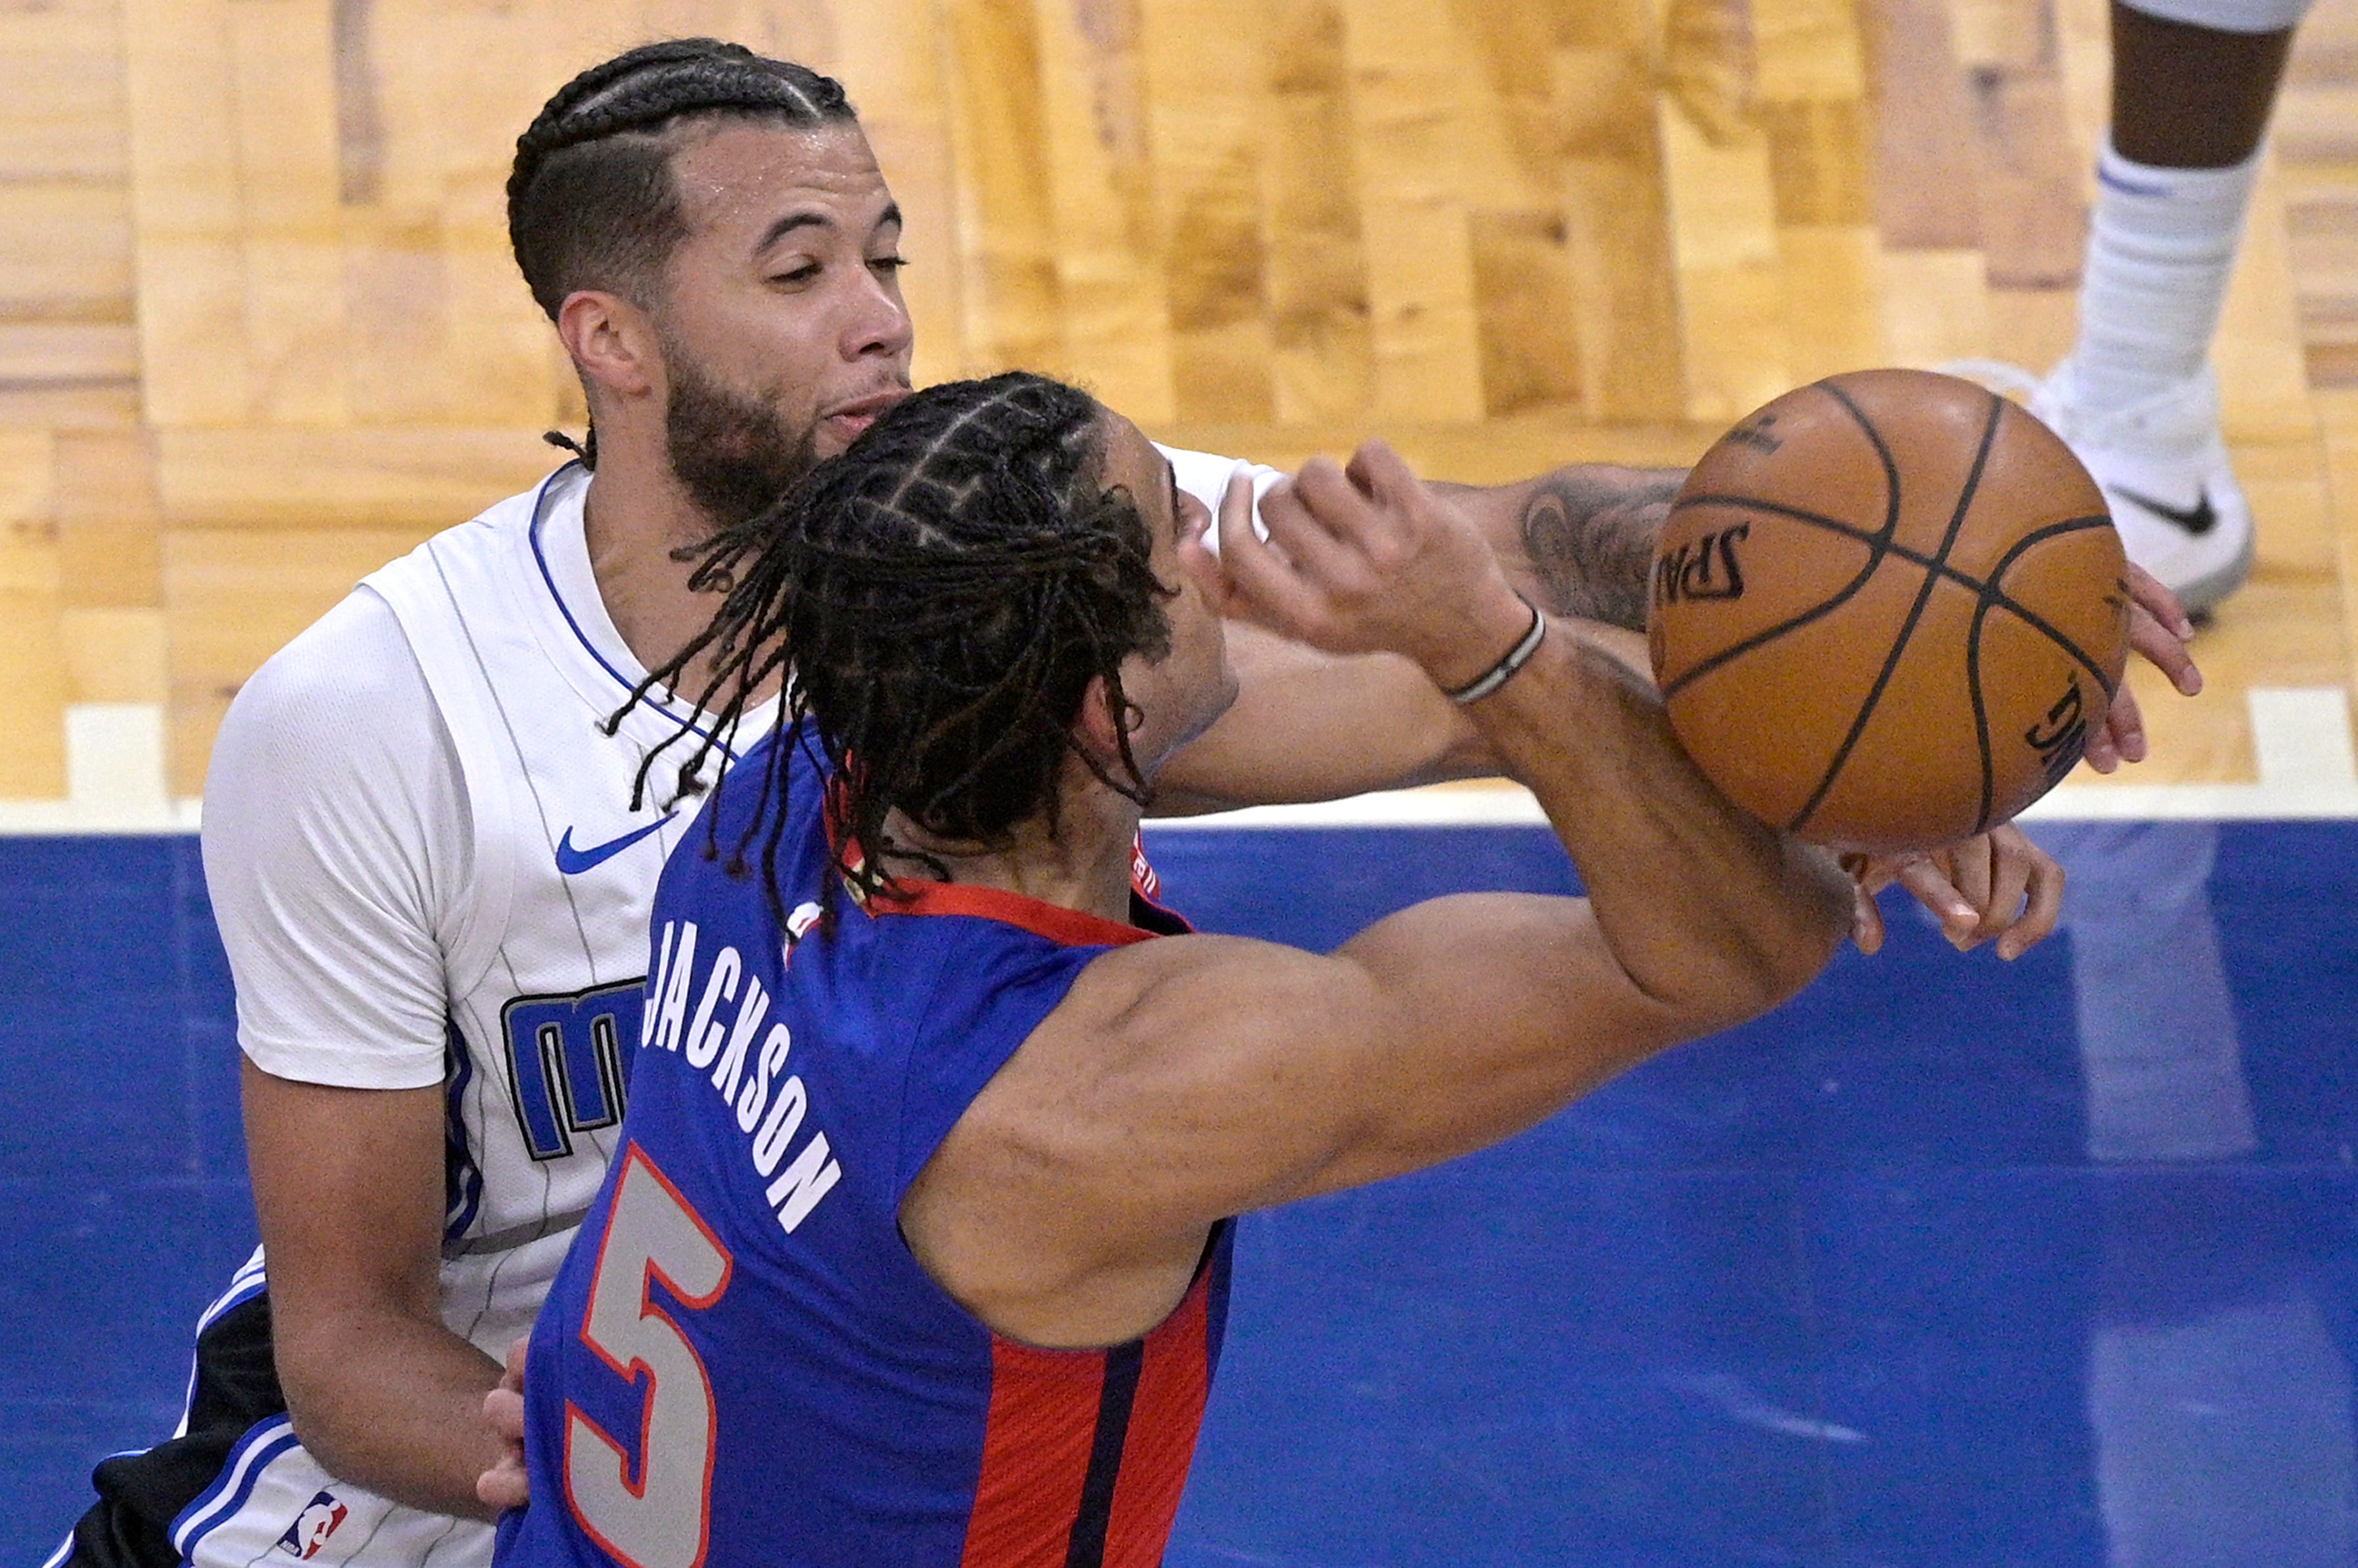 Orlando Magic guard Michael Carter-Williams (7) knocks the ball out of the hands of Detroit Pistons guard Frank Jackson (5) who was going up for a shot during the first half of an NBA basketball game, Tuesday, Feb. 23, 2021.